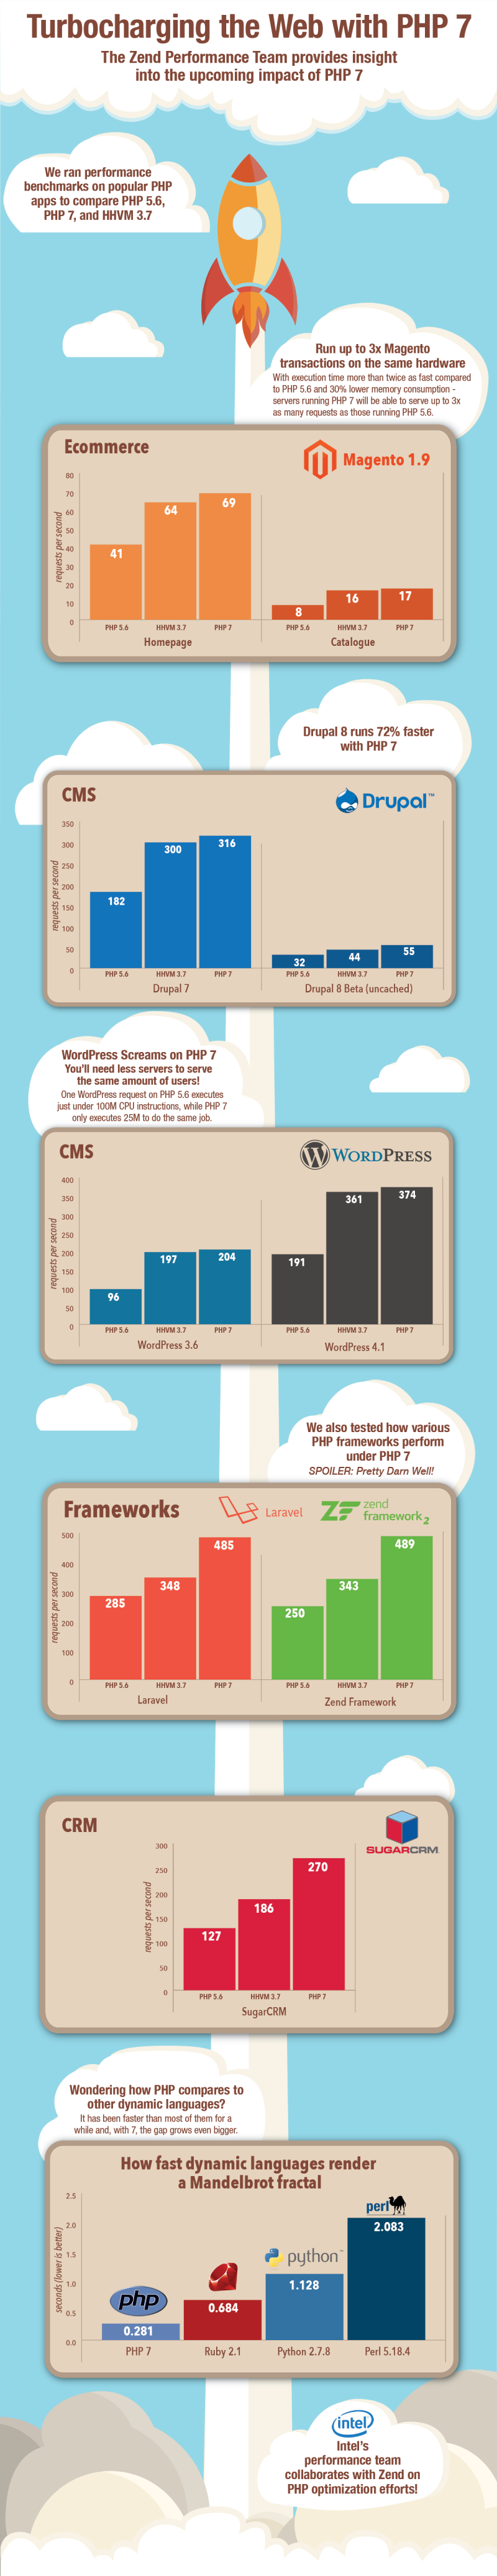 php7-infographic